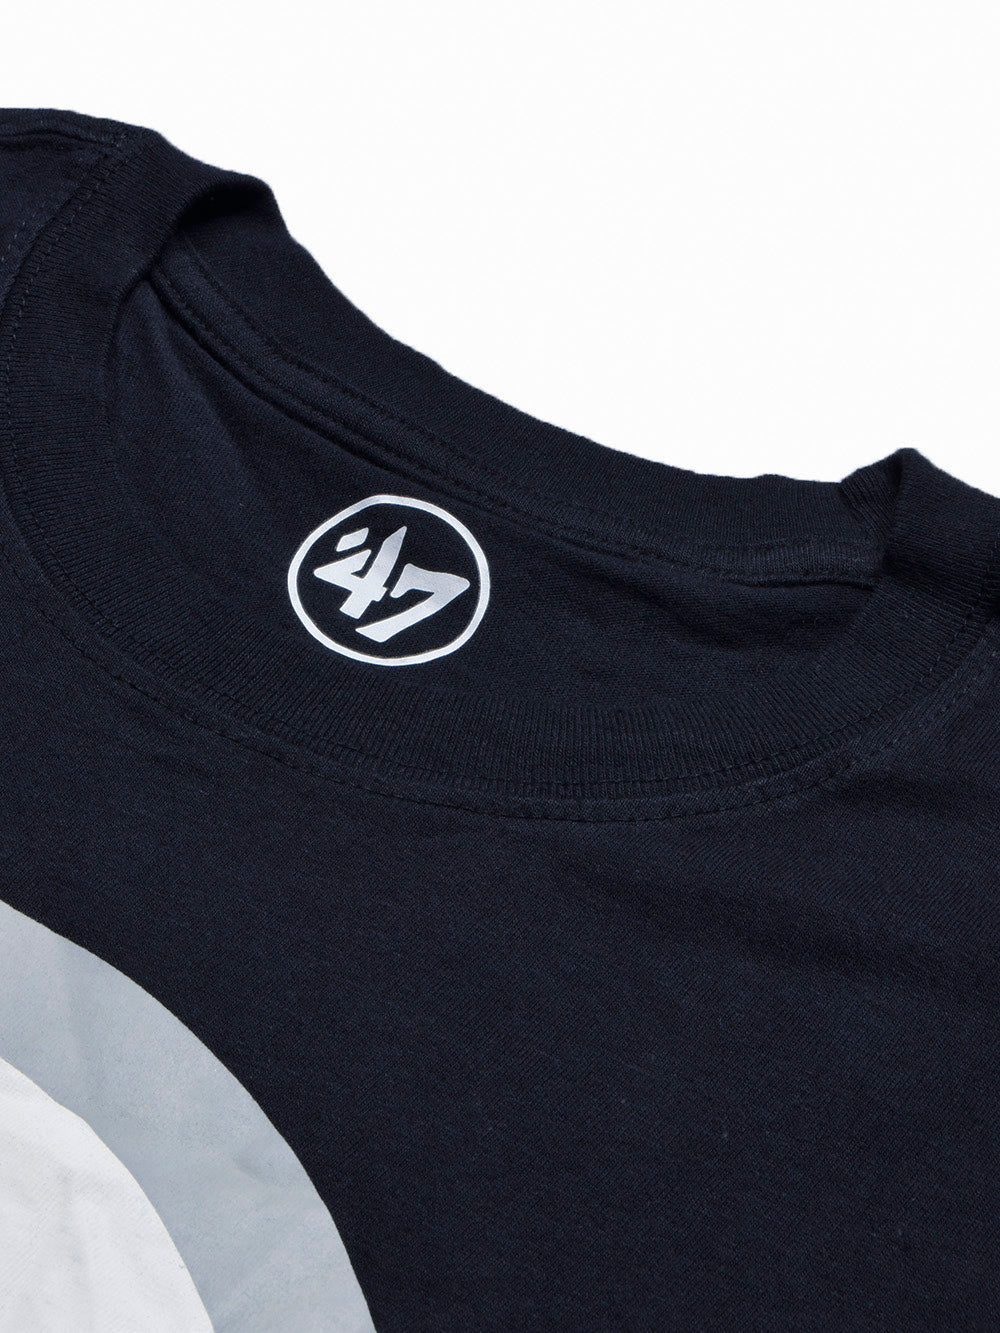 47 Single Jersey Crew Neck Tee Shirt For Men-Dark Navy with Print-BE1018/BR13255